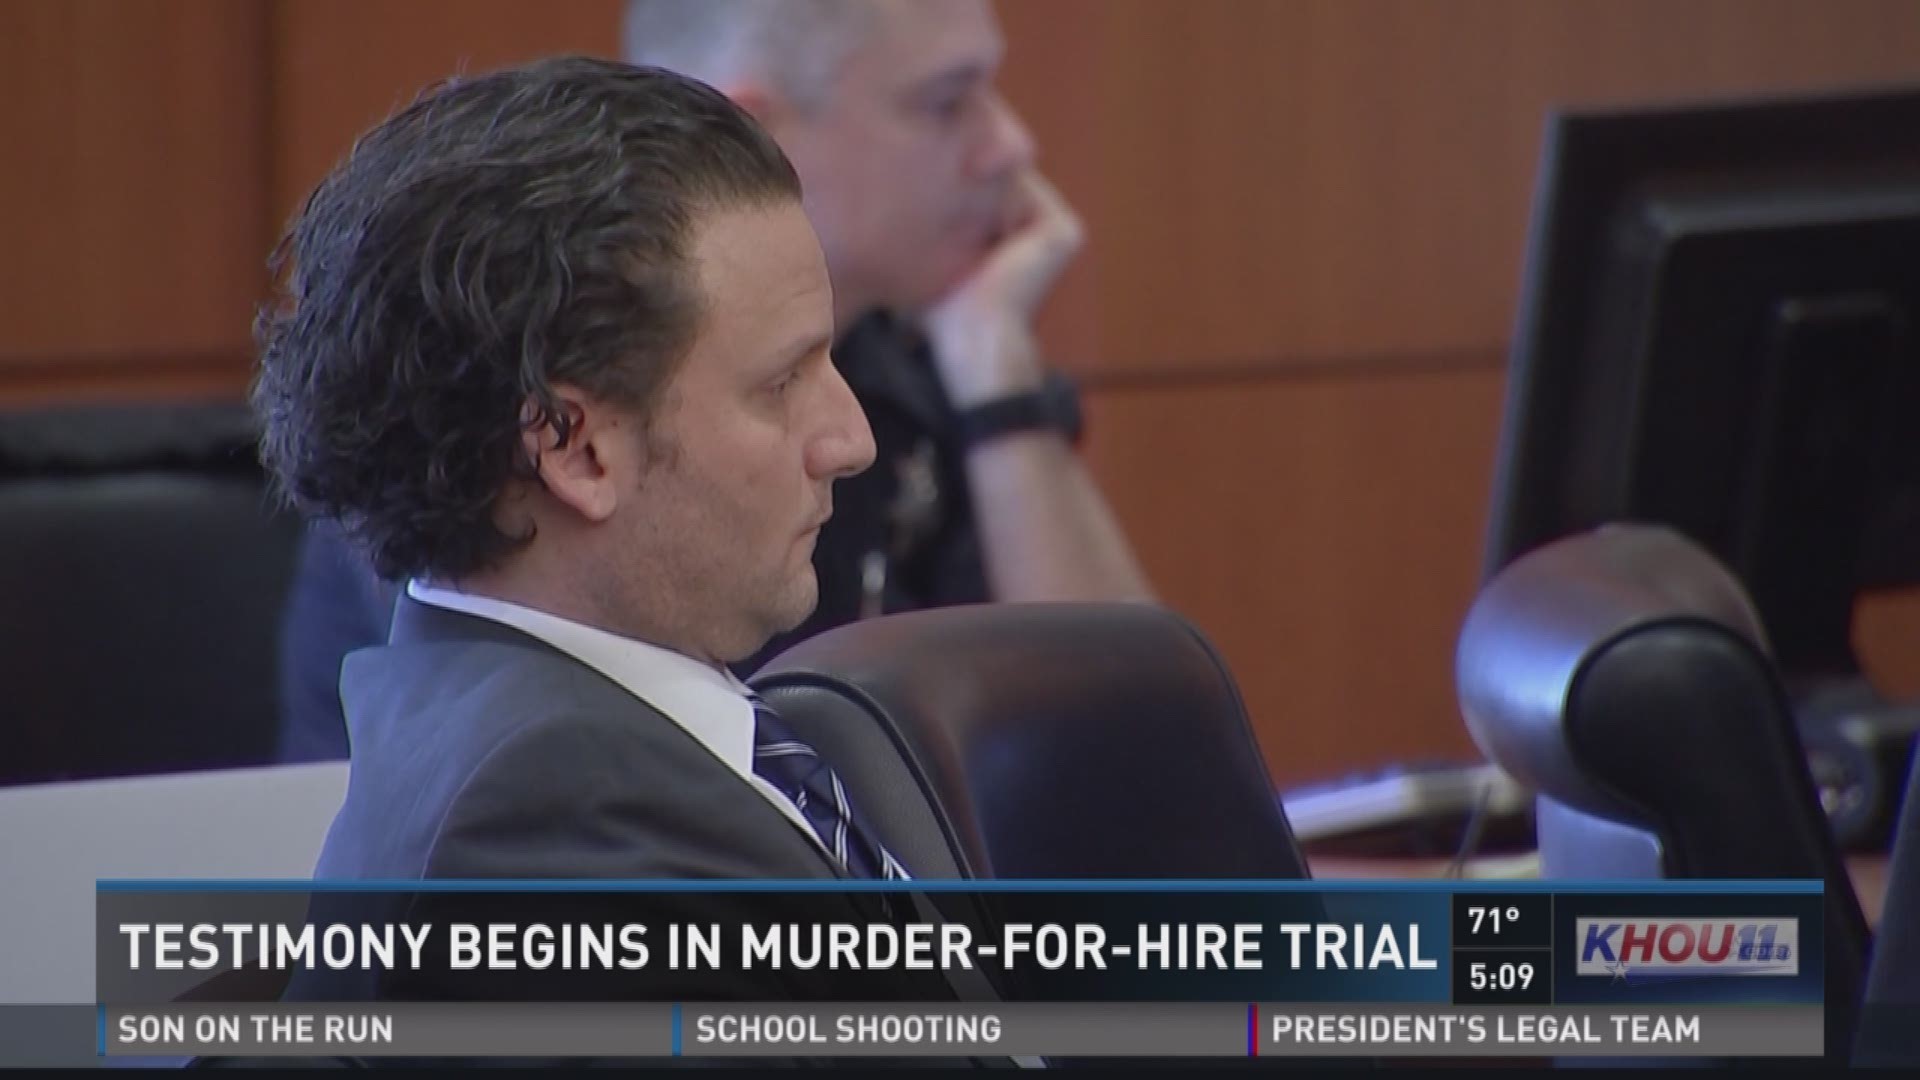 Key witnesses took the stand during the second day of a murder-for-hire trial that has gained national attention. Leon Jacob, a former doctor, was accused of hiring a hit man to kill his ex-girlfriend, Meghan Verikas, last year.